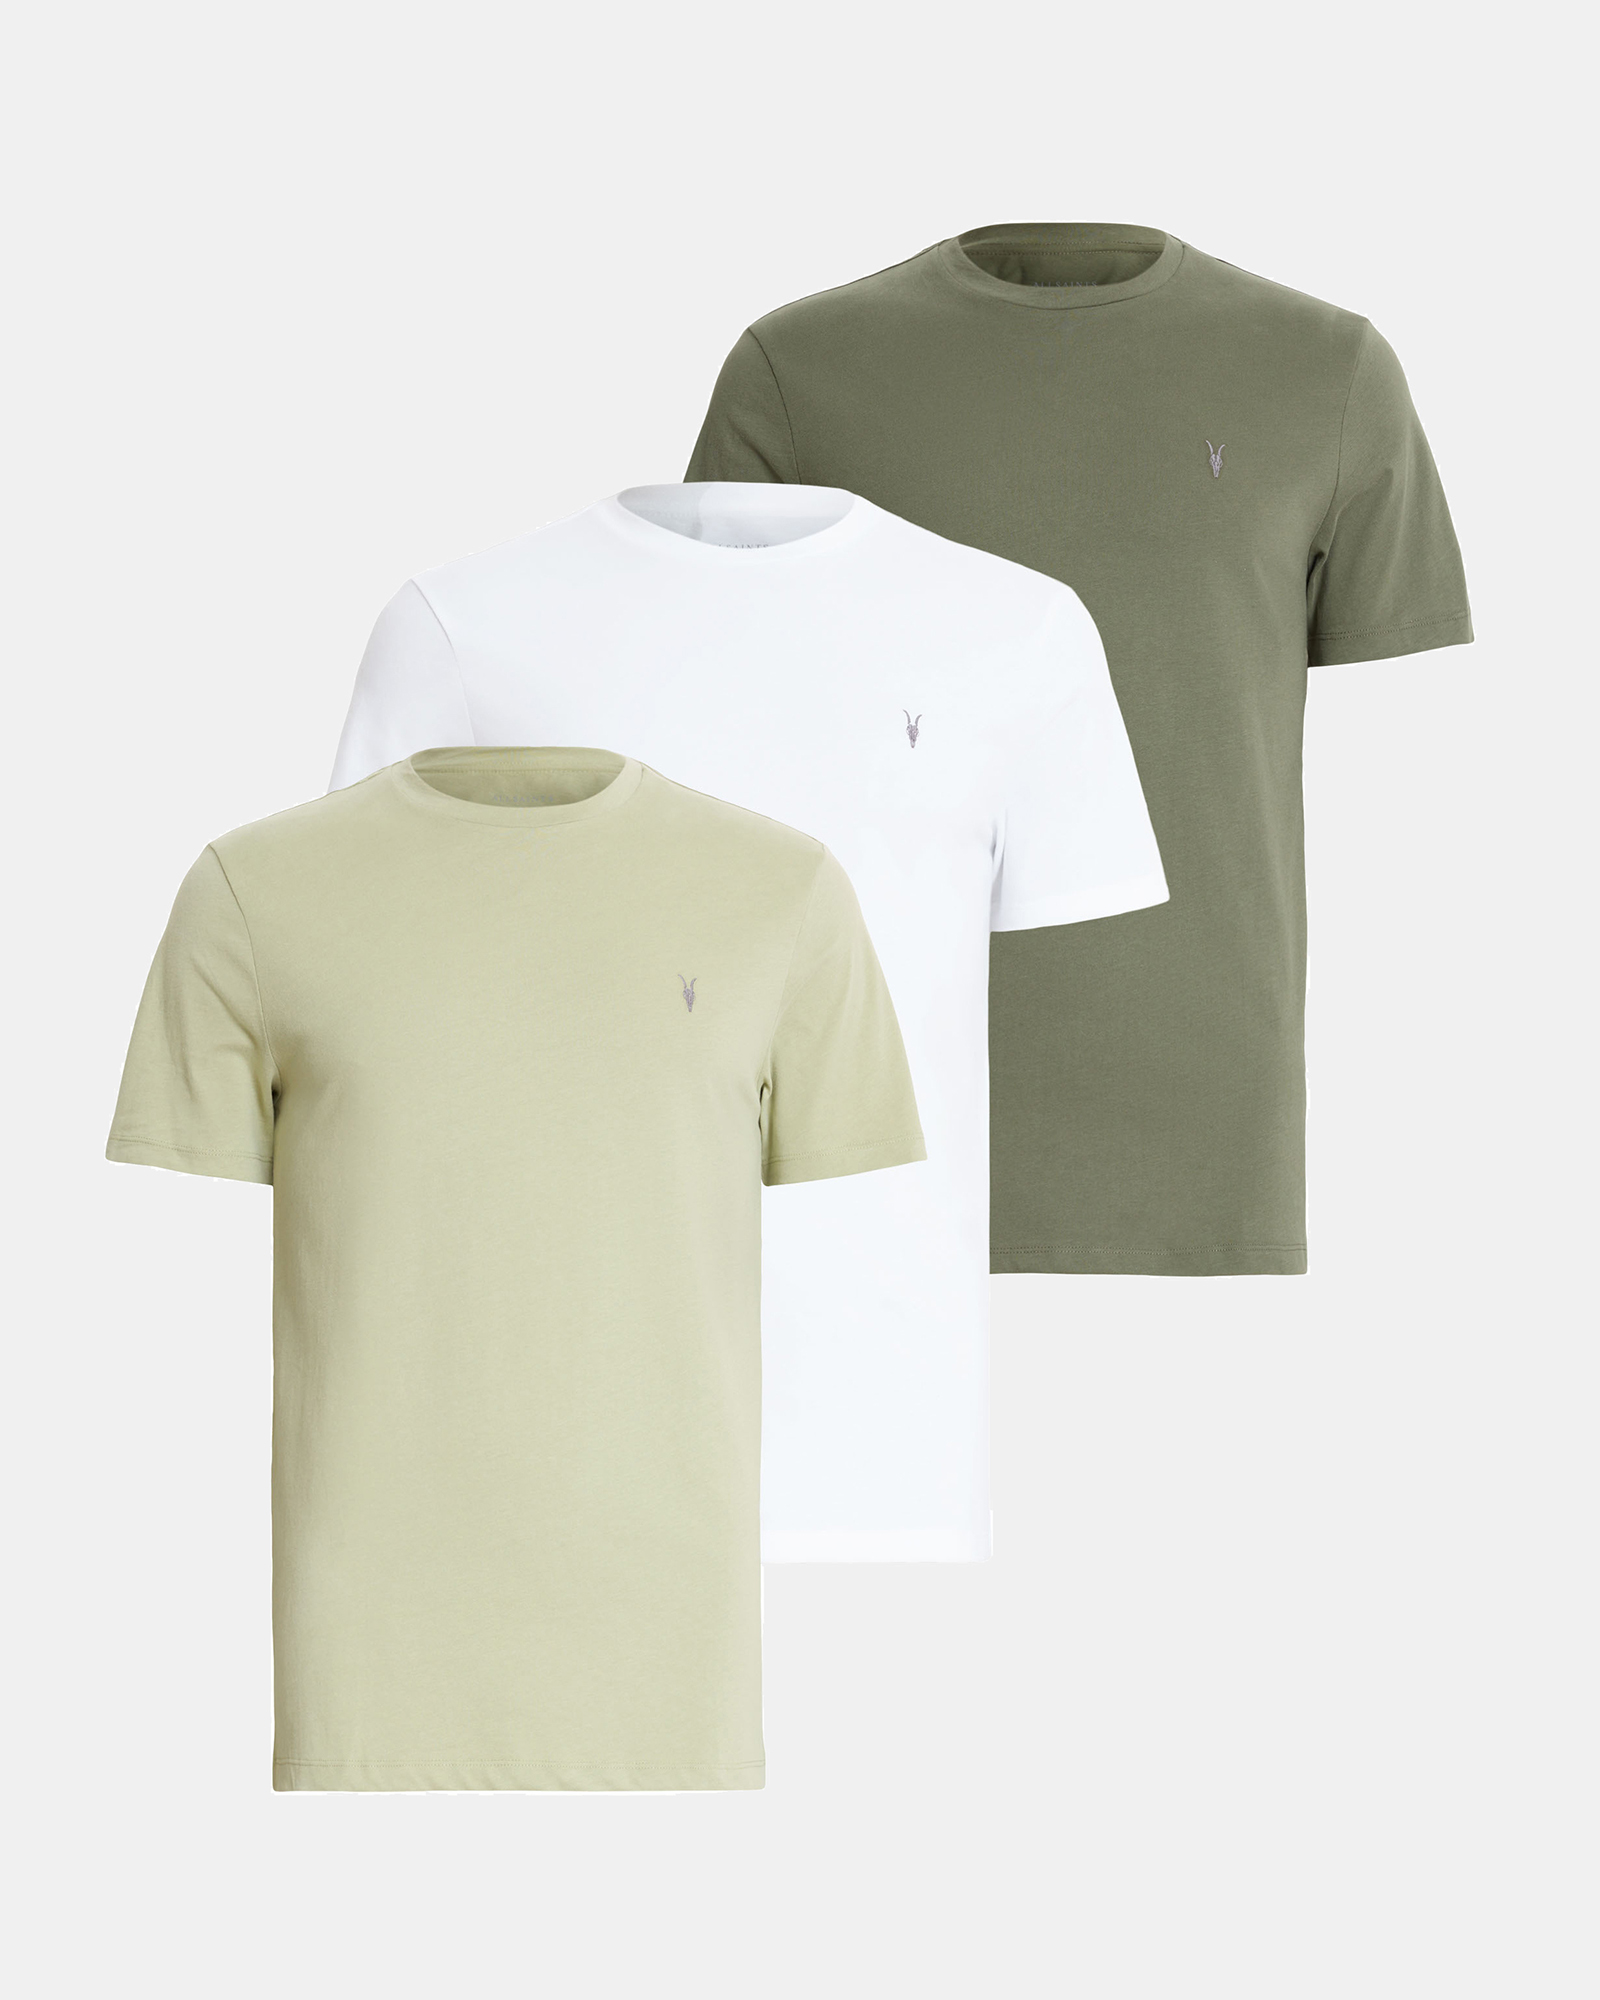 AllSaints Brace Brushed Cotton T-Shirts 3 Pack,, GRN/GRN/OPT WHITE